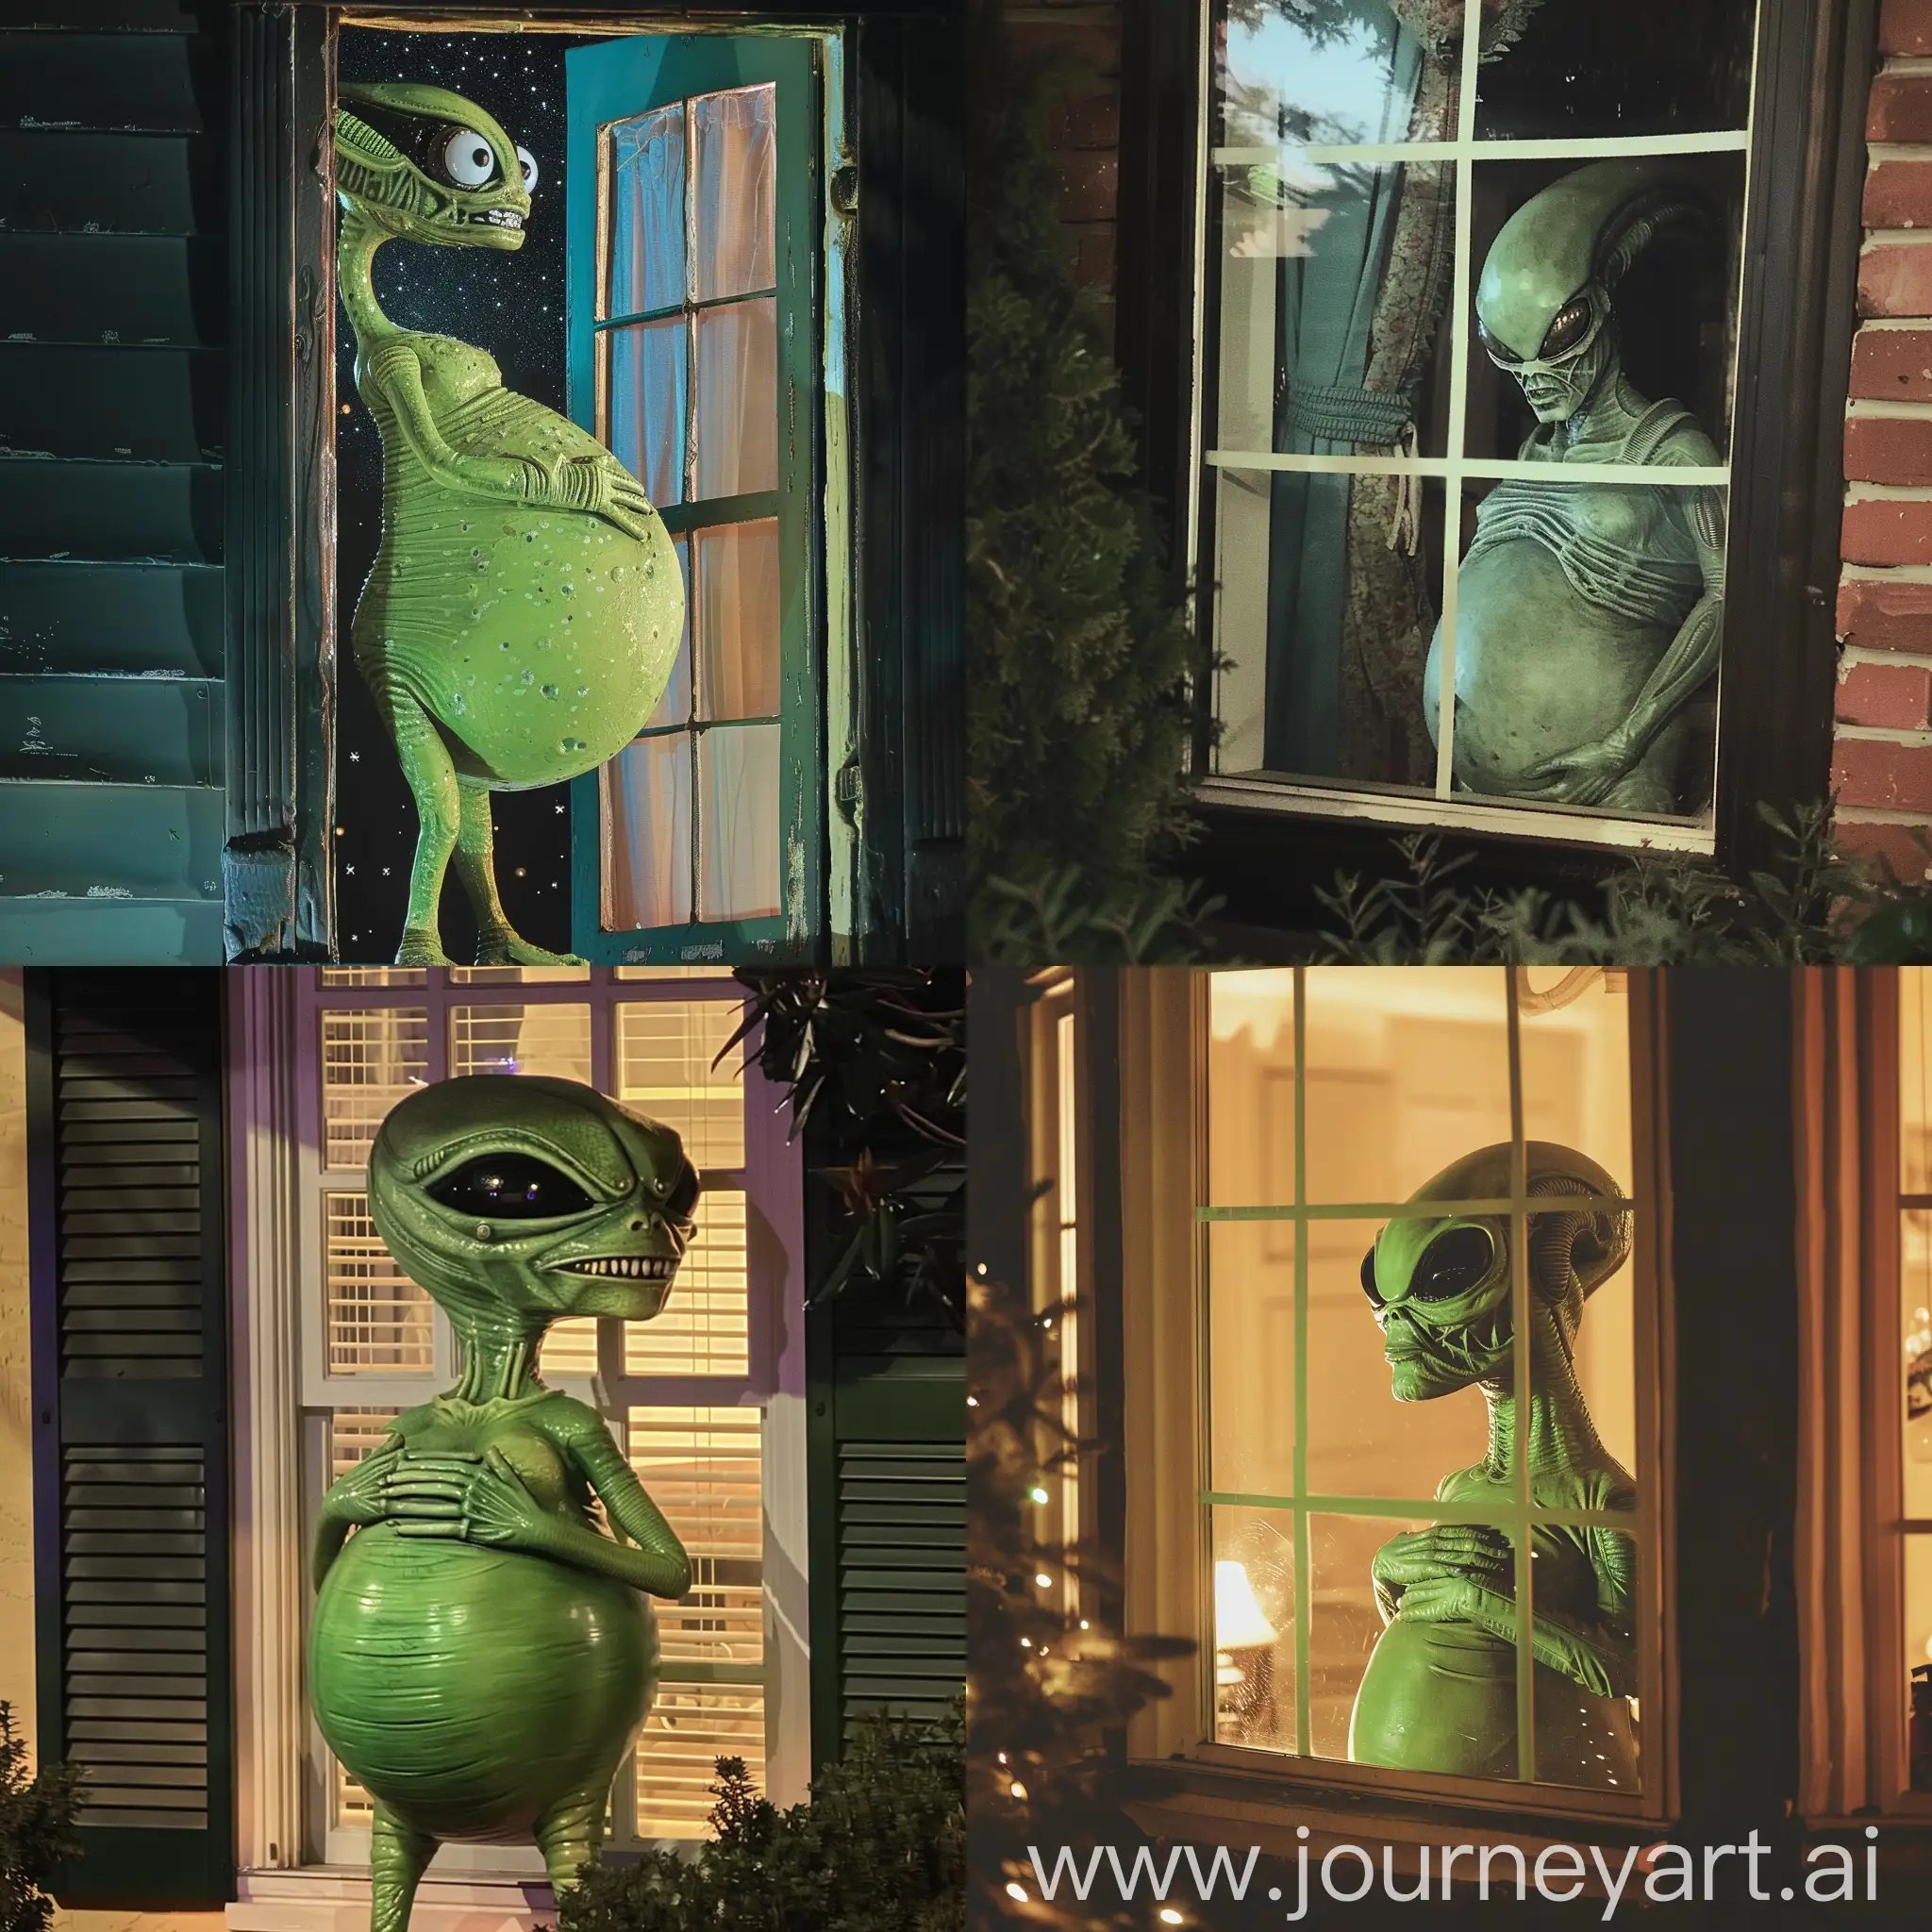 A green female Alien, 7 feet tall, Very Pregnant, The Alien's pregnant belly is very large. The alien is standing outside someone's window at night, Peeking into the window.